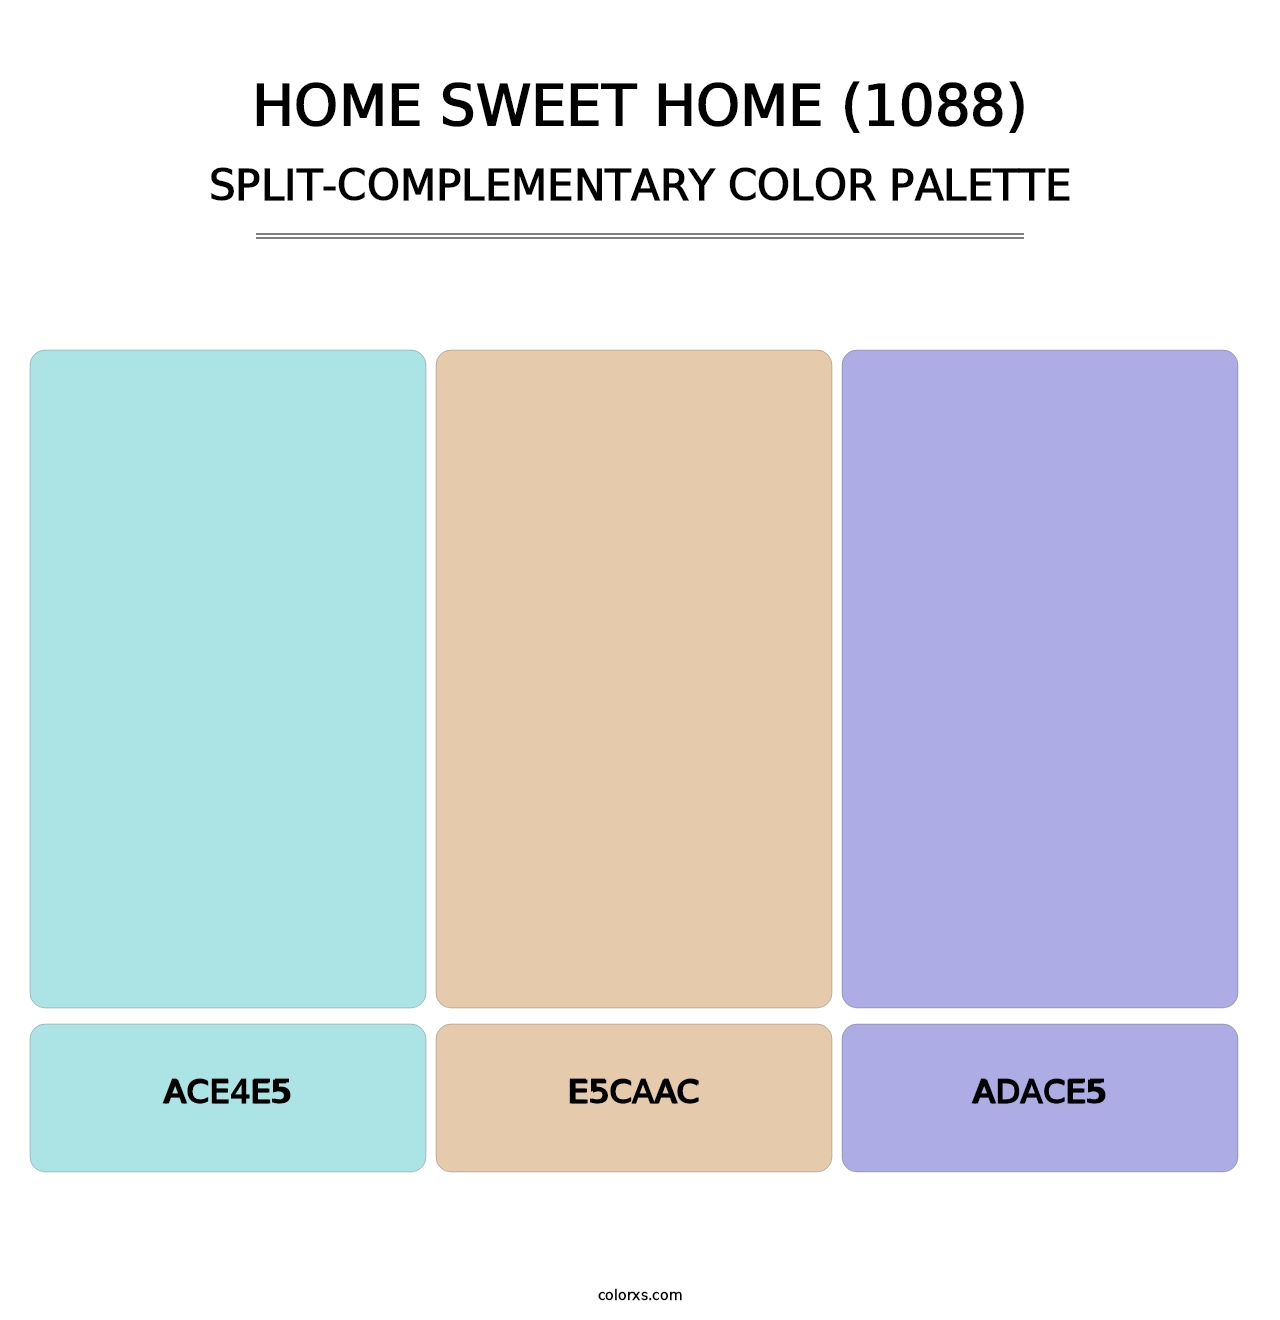 Home Sweet Home (1088) - Split-Complementary Color Palette